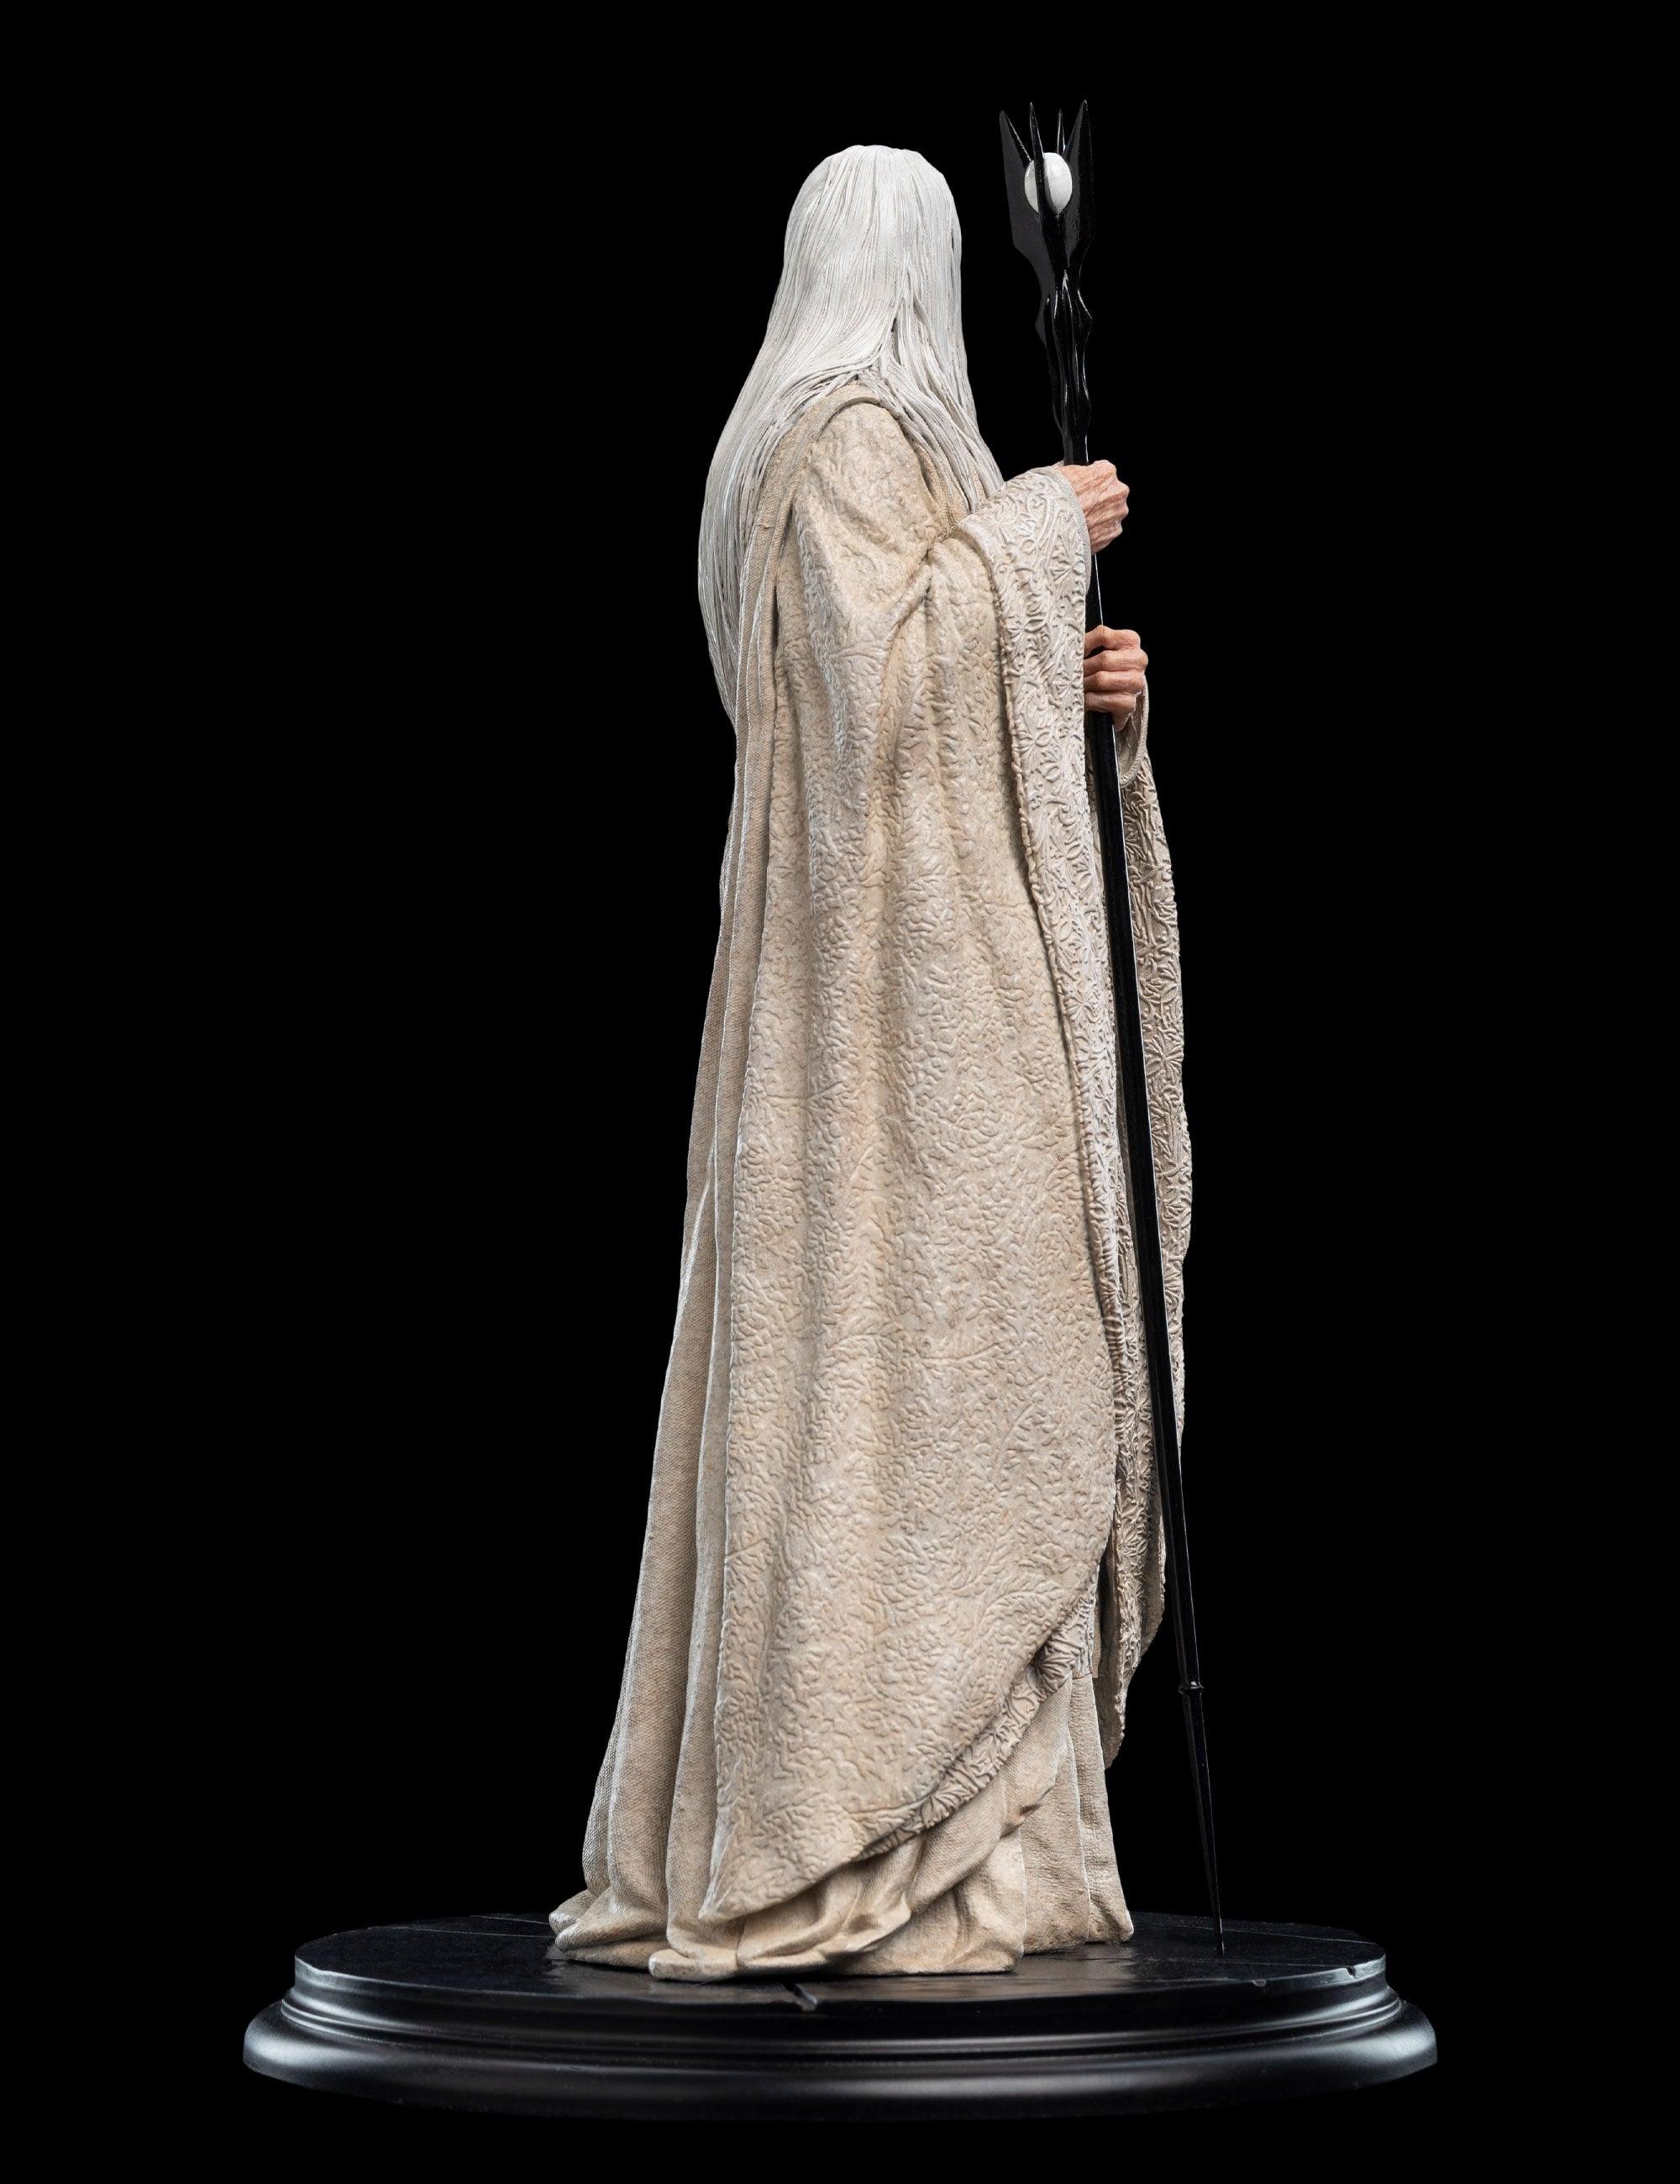 The Lord of the Rings - Saruman the White Wizard Statue Statue by Weta Workshop | Titan Pop Culture